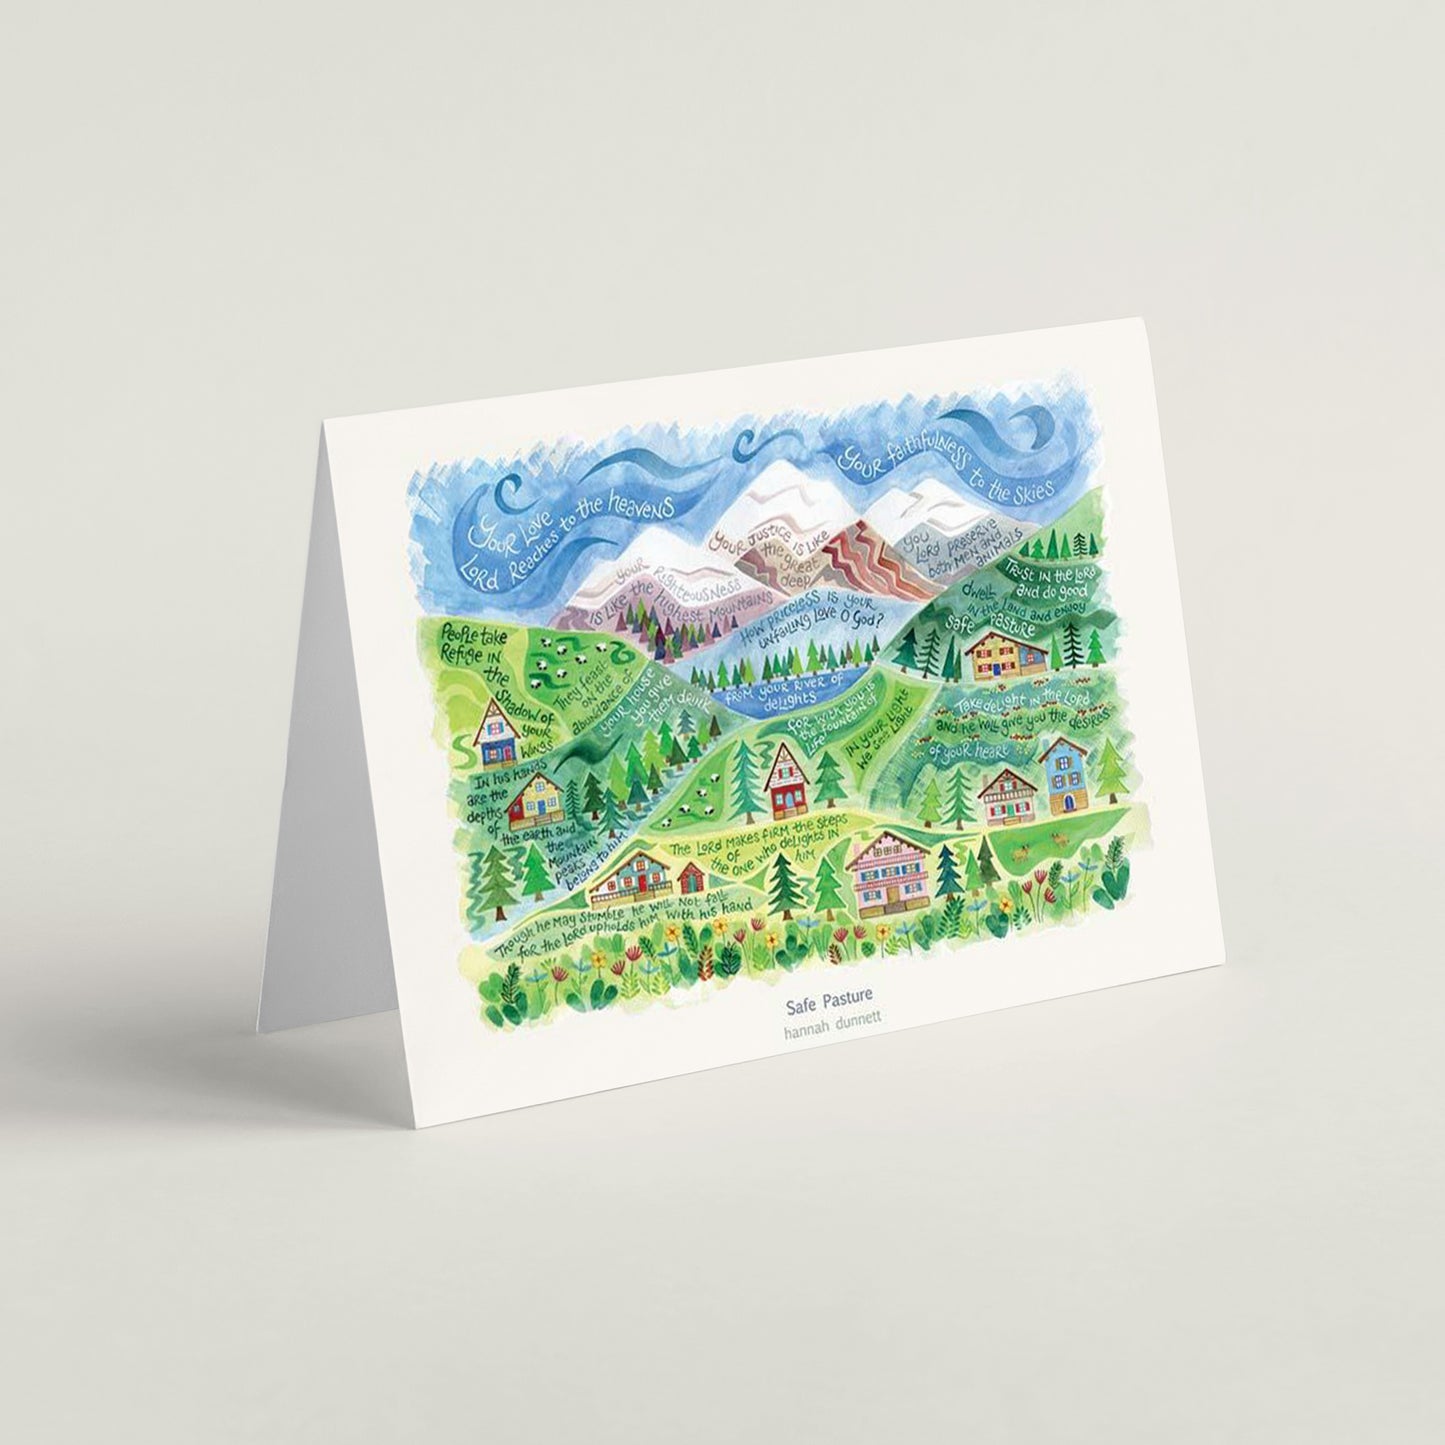 'Safe Pasture' by Hannah Dunnett - Greeting Card